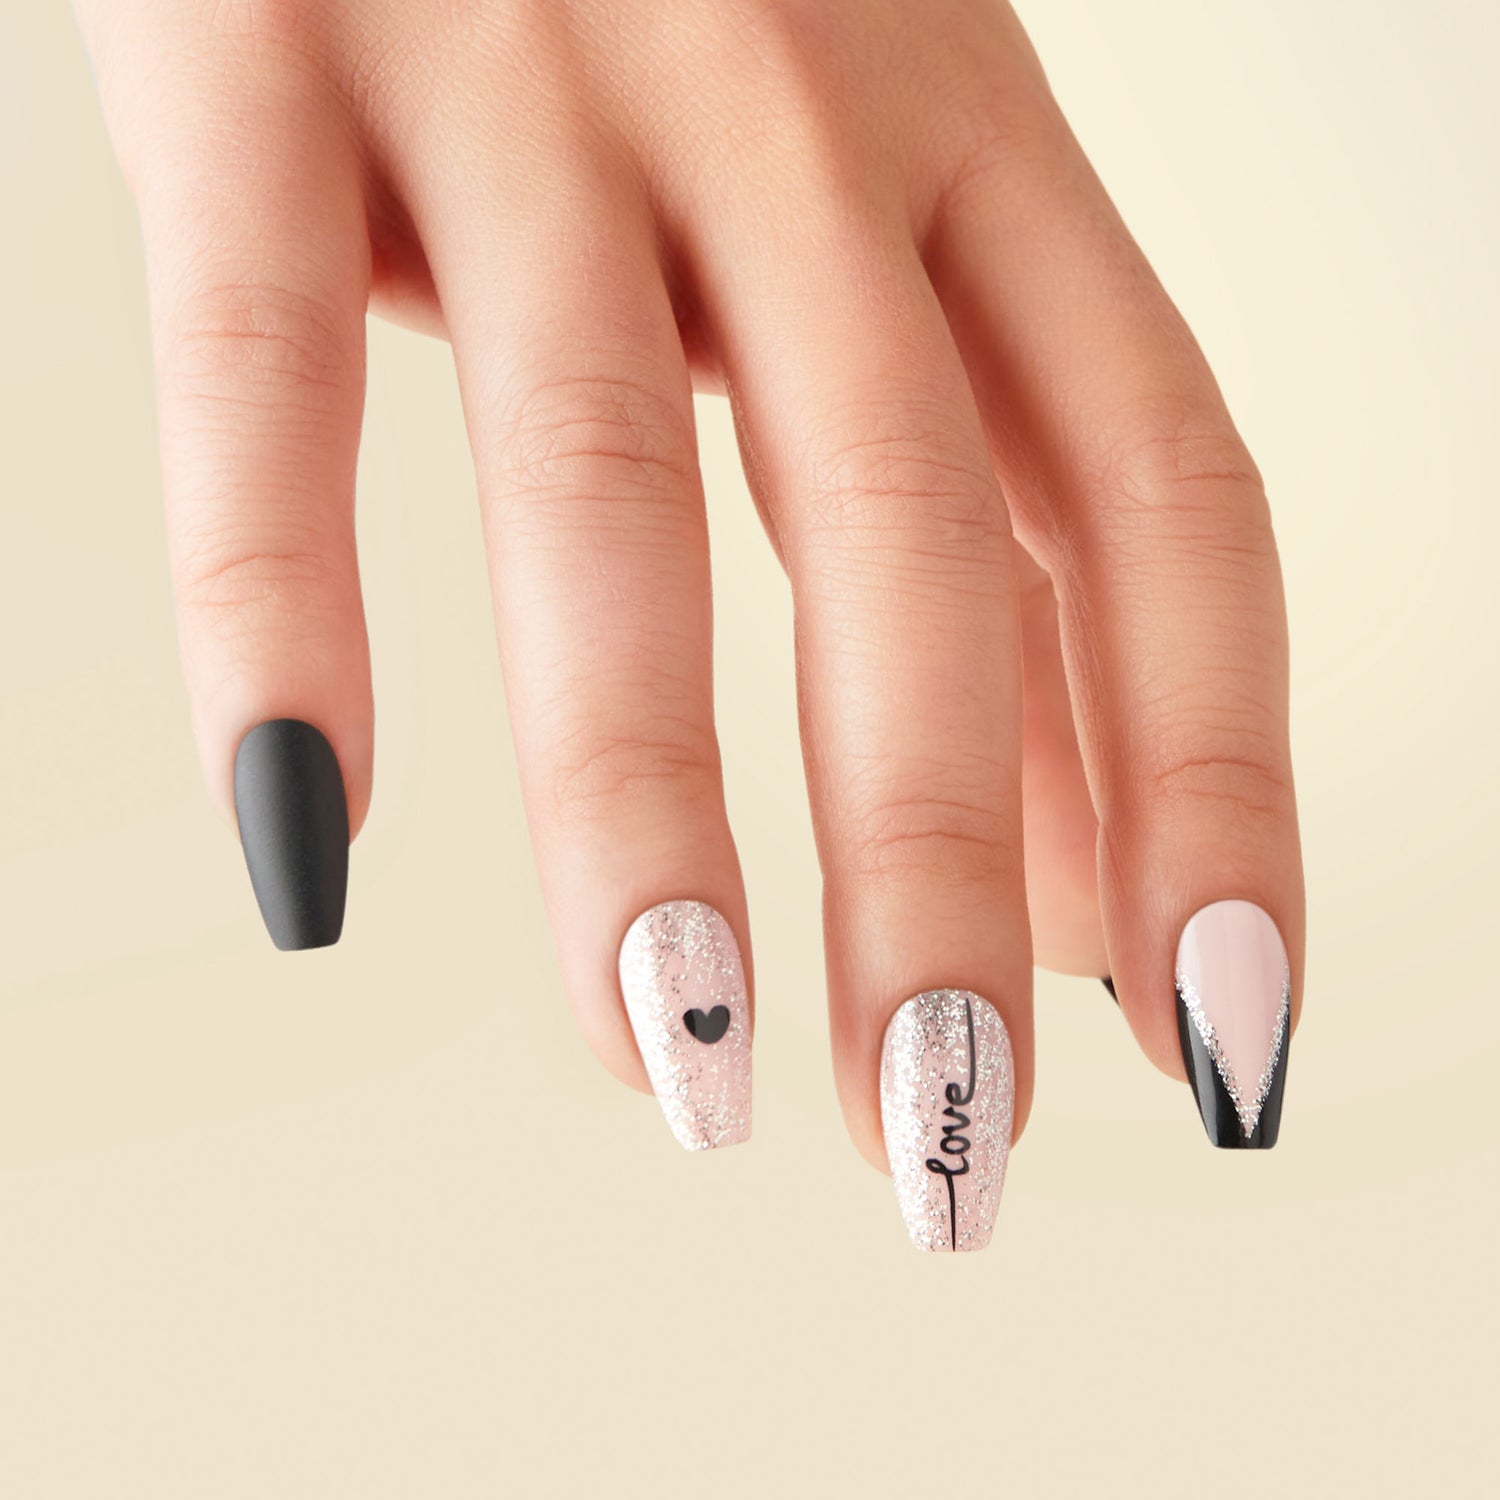 Princess nail & Spai a well established Nail salon and Spa on Fore Street  Exeter.Over many years, our professional, skillful team have built an  excellent... | By Princess Nails & SpaFacebook